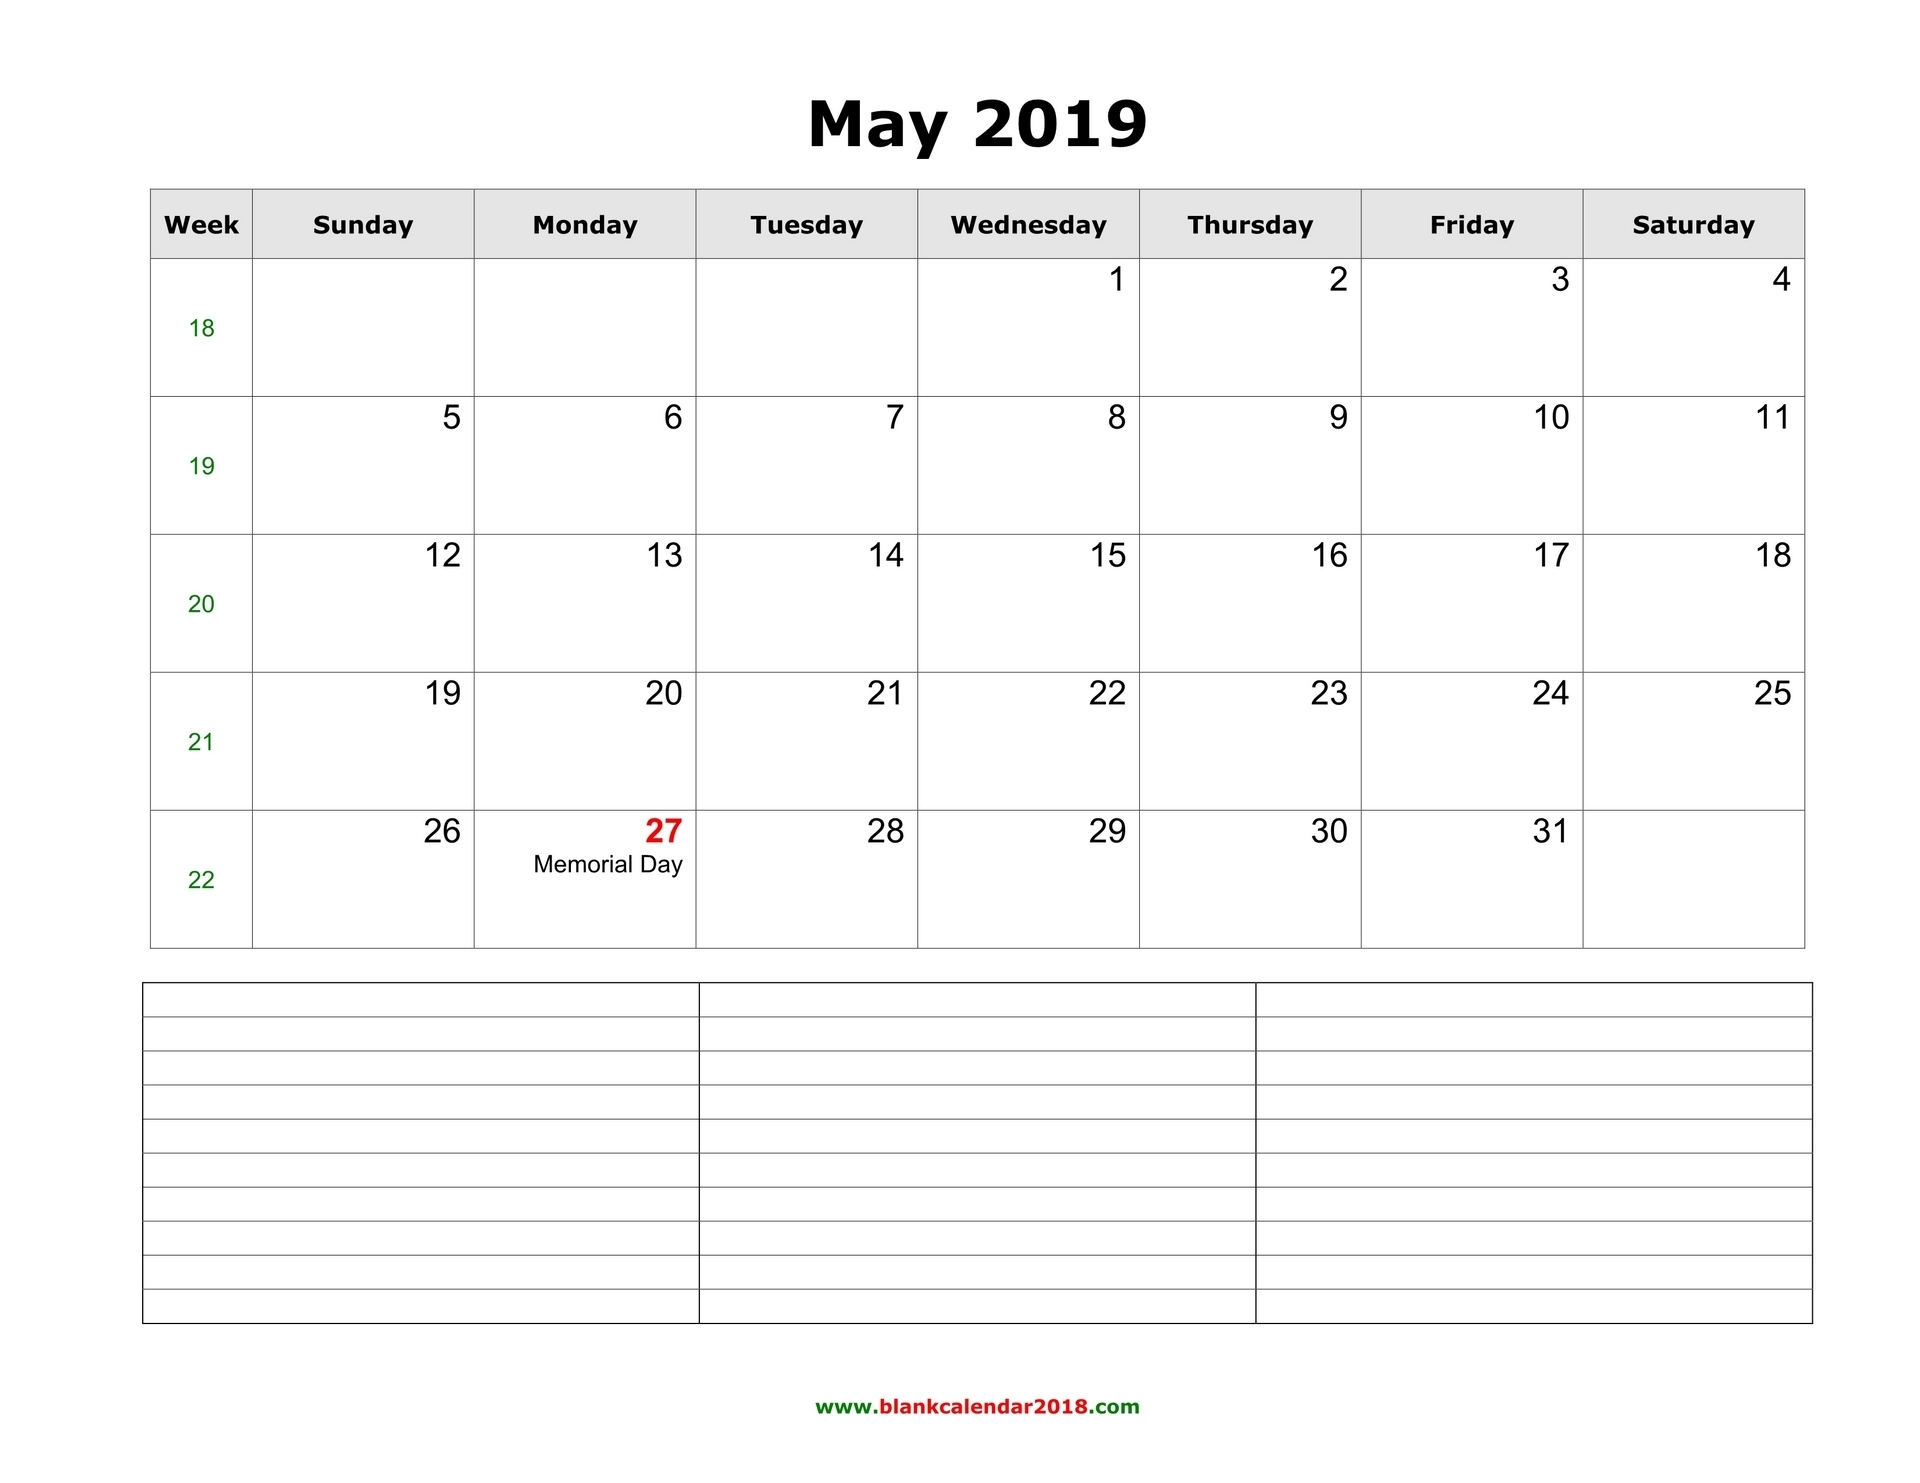 Blank Calendar For May 2019 intended for Blank Calendar For This Week